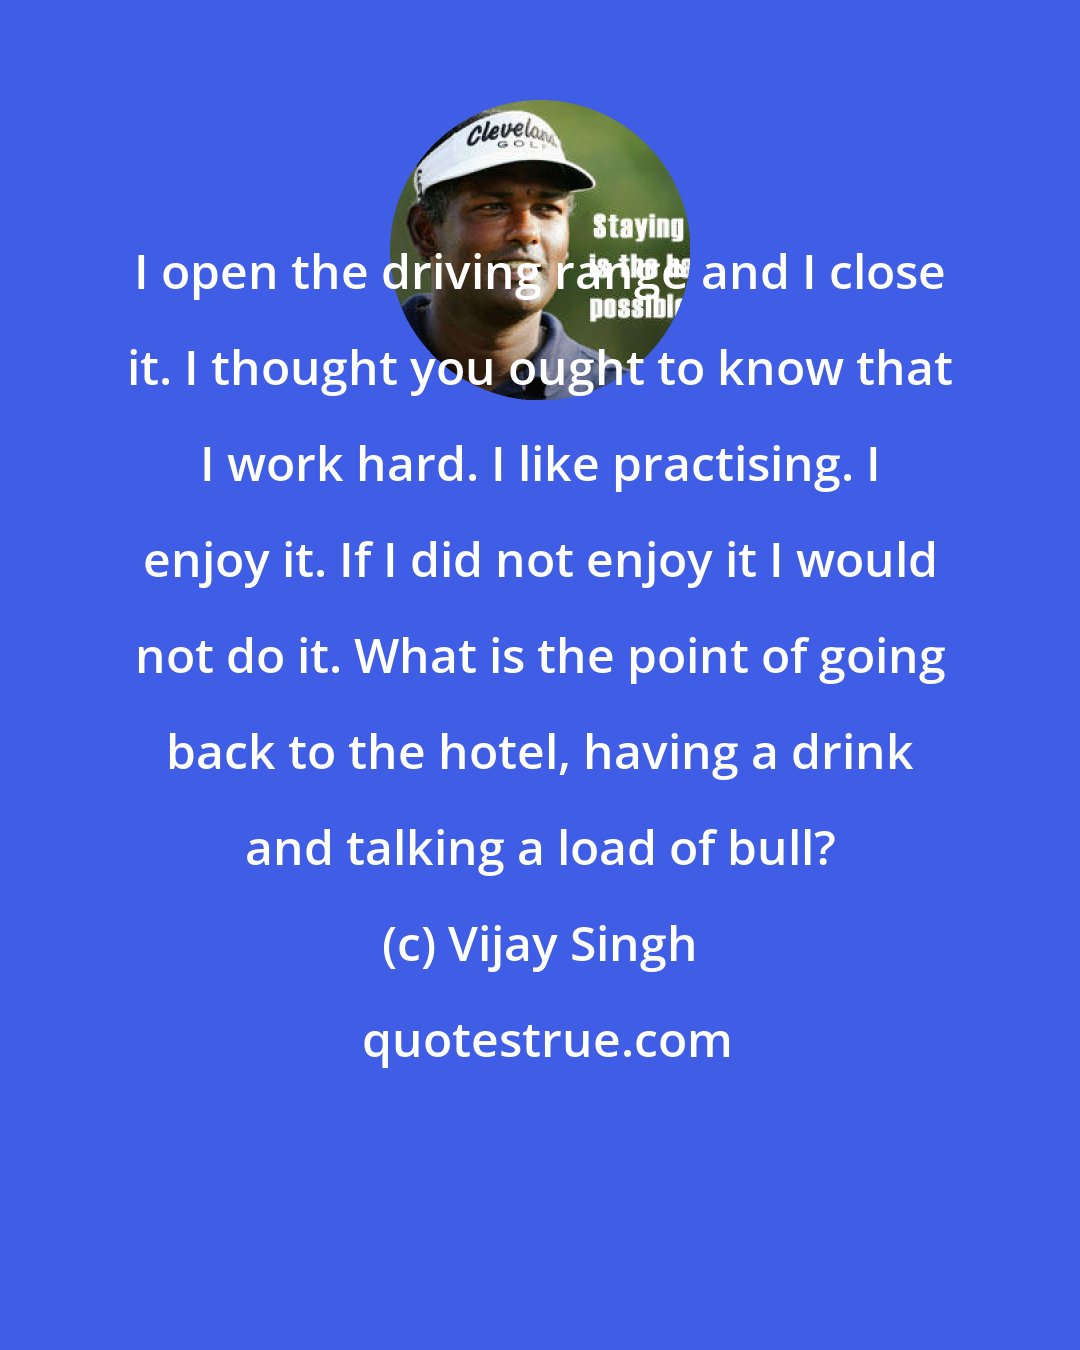 Vijay Singh: I open the driving range and I close it. I thought you ought to know that I work hard. I like practising. I enjoy it. If I did not enjoy it I would not do it. What is the point of going back to the hotel, having a drink and talking a load of bull?